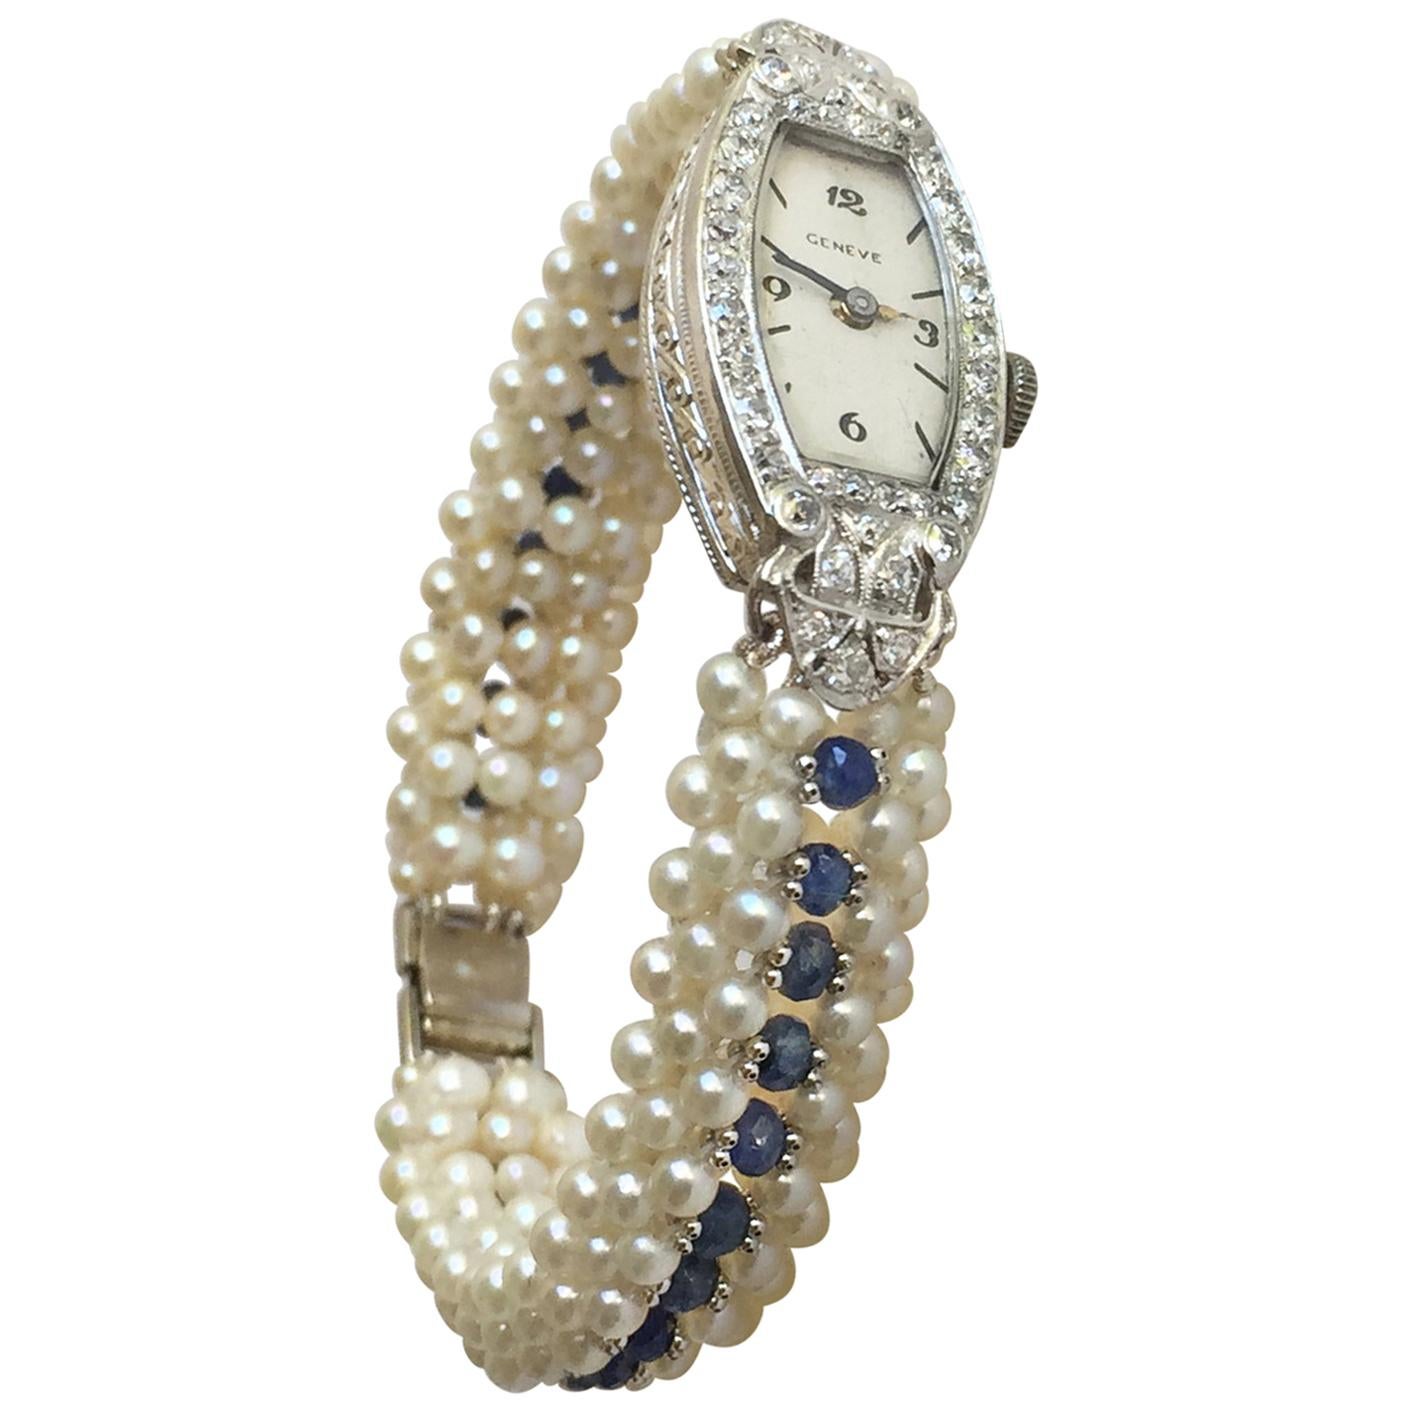 Marina J Vintage Diamond Watch with Pearl and Sapphire Band and 14 K White Gold 